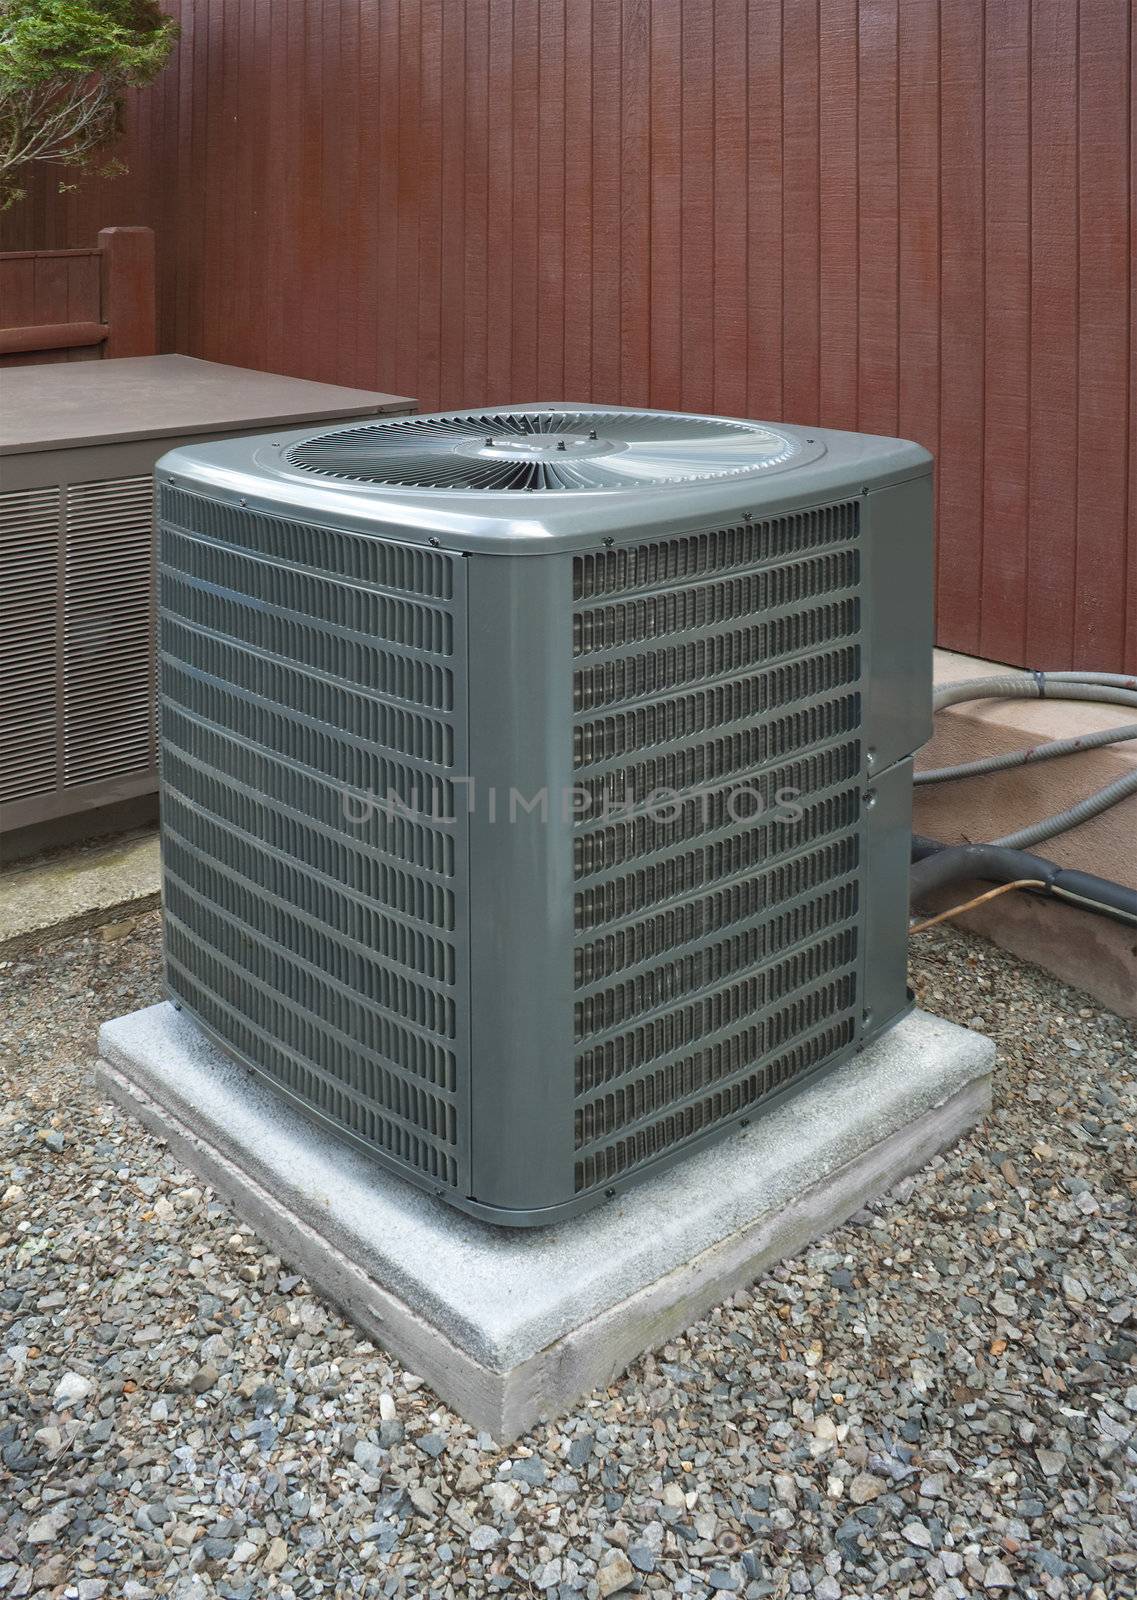 Heat pump and ac unit used to heat and cool a home